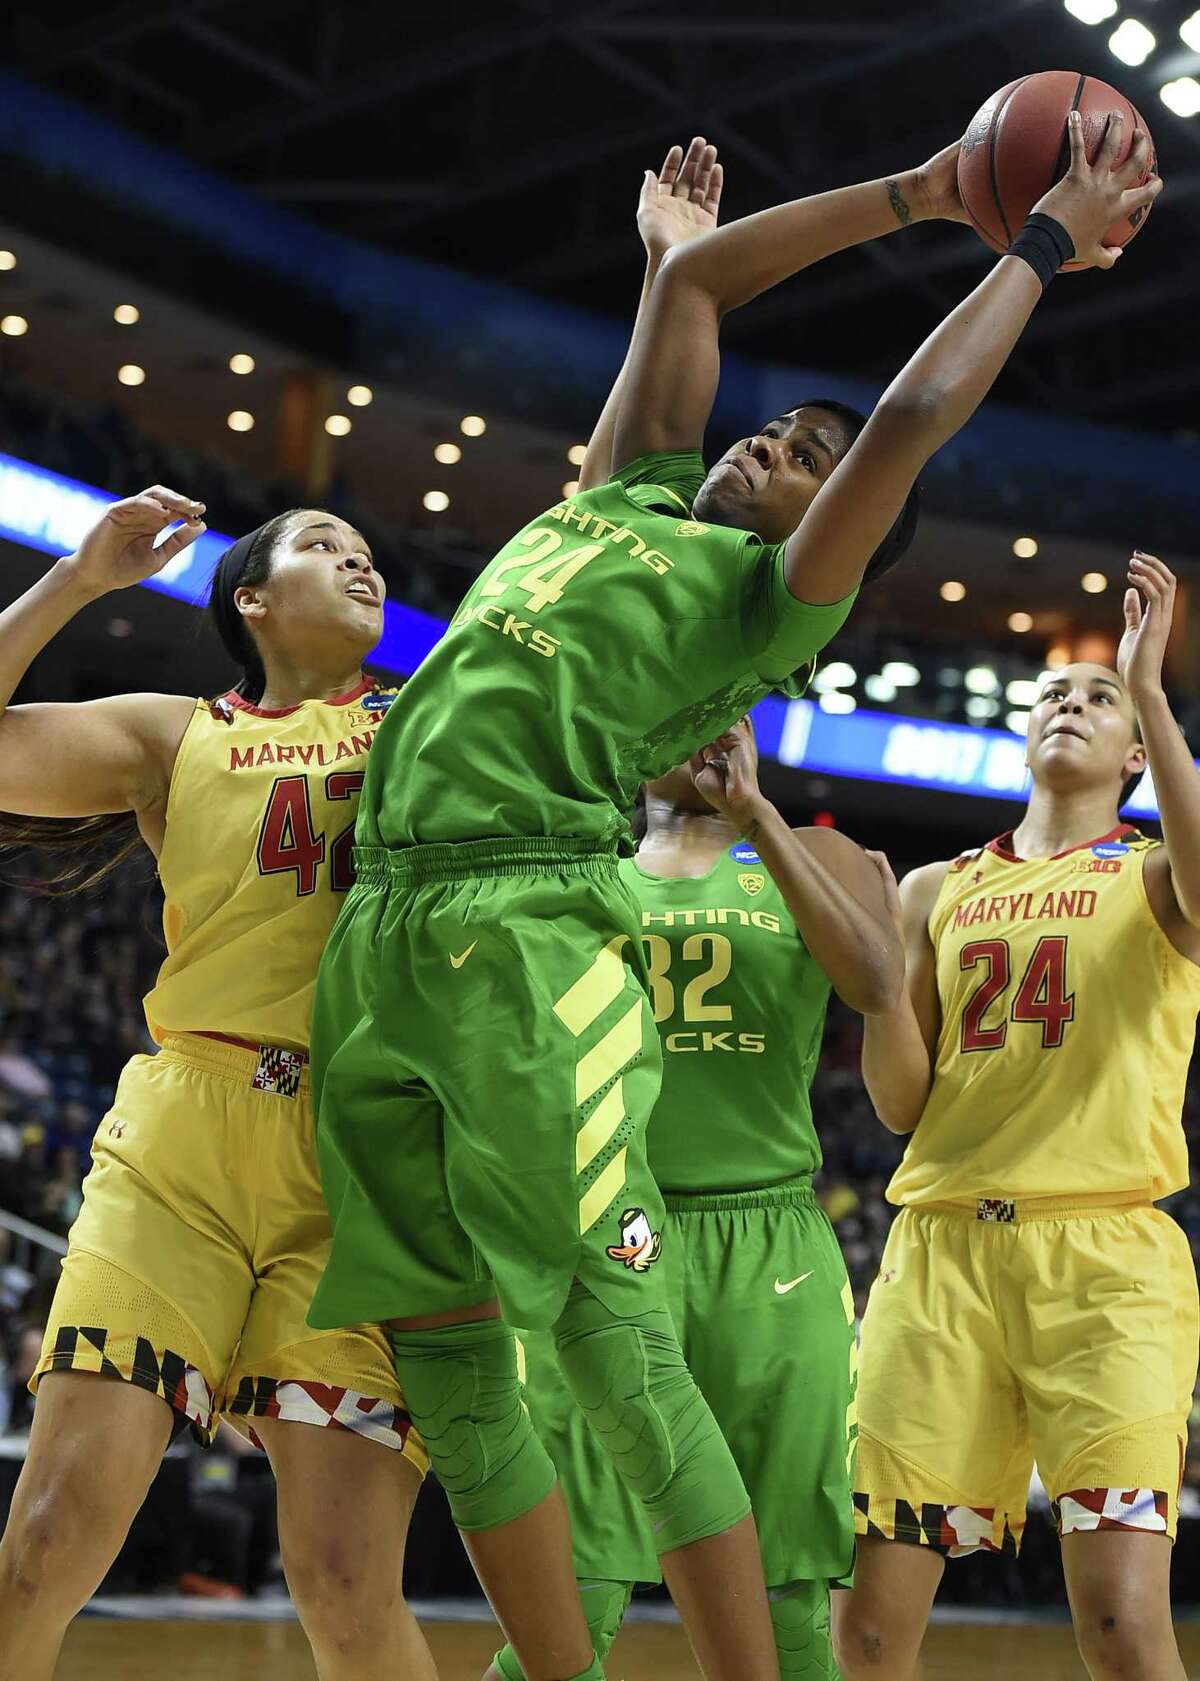 Oregon’s Ruthy Hebard pulls down an offensive rebound during the Ducks’ win over Maryland in the regional semifinals Saturday in Bridgeport.